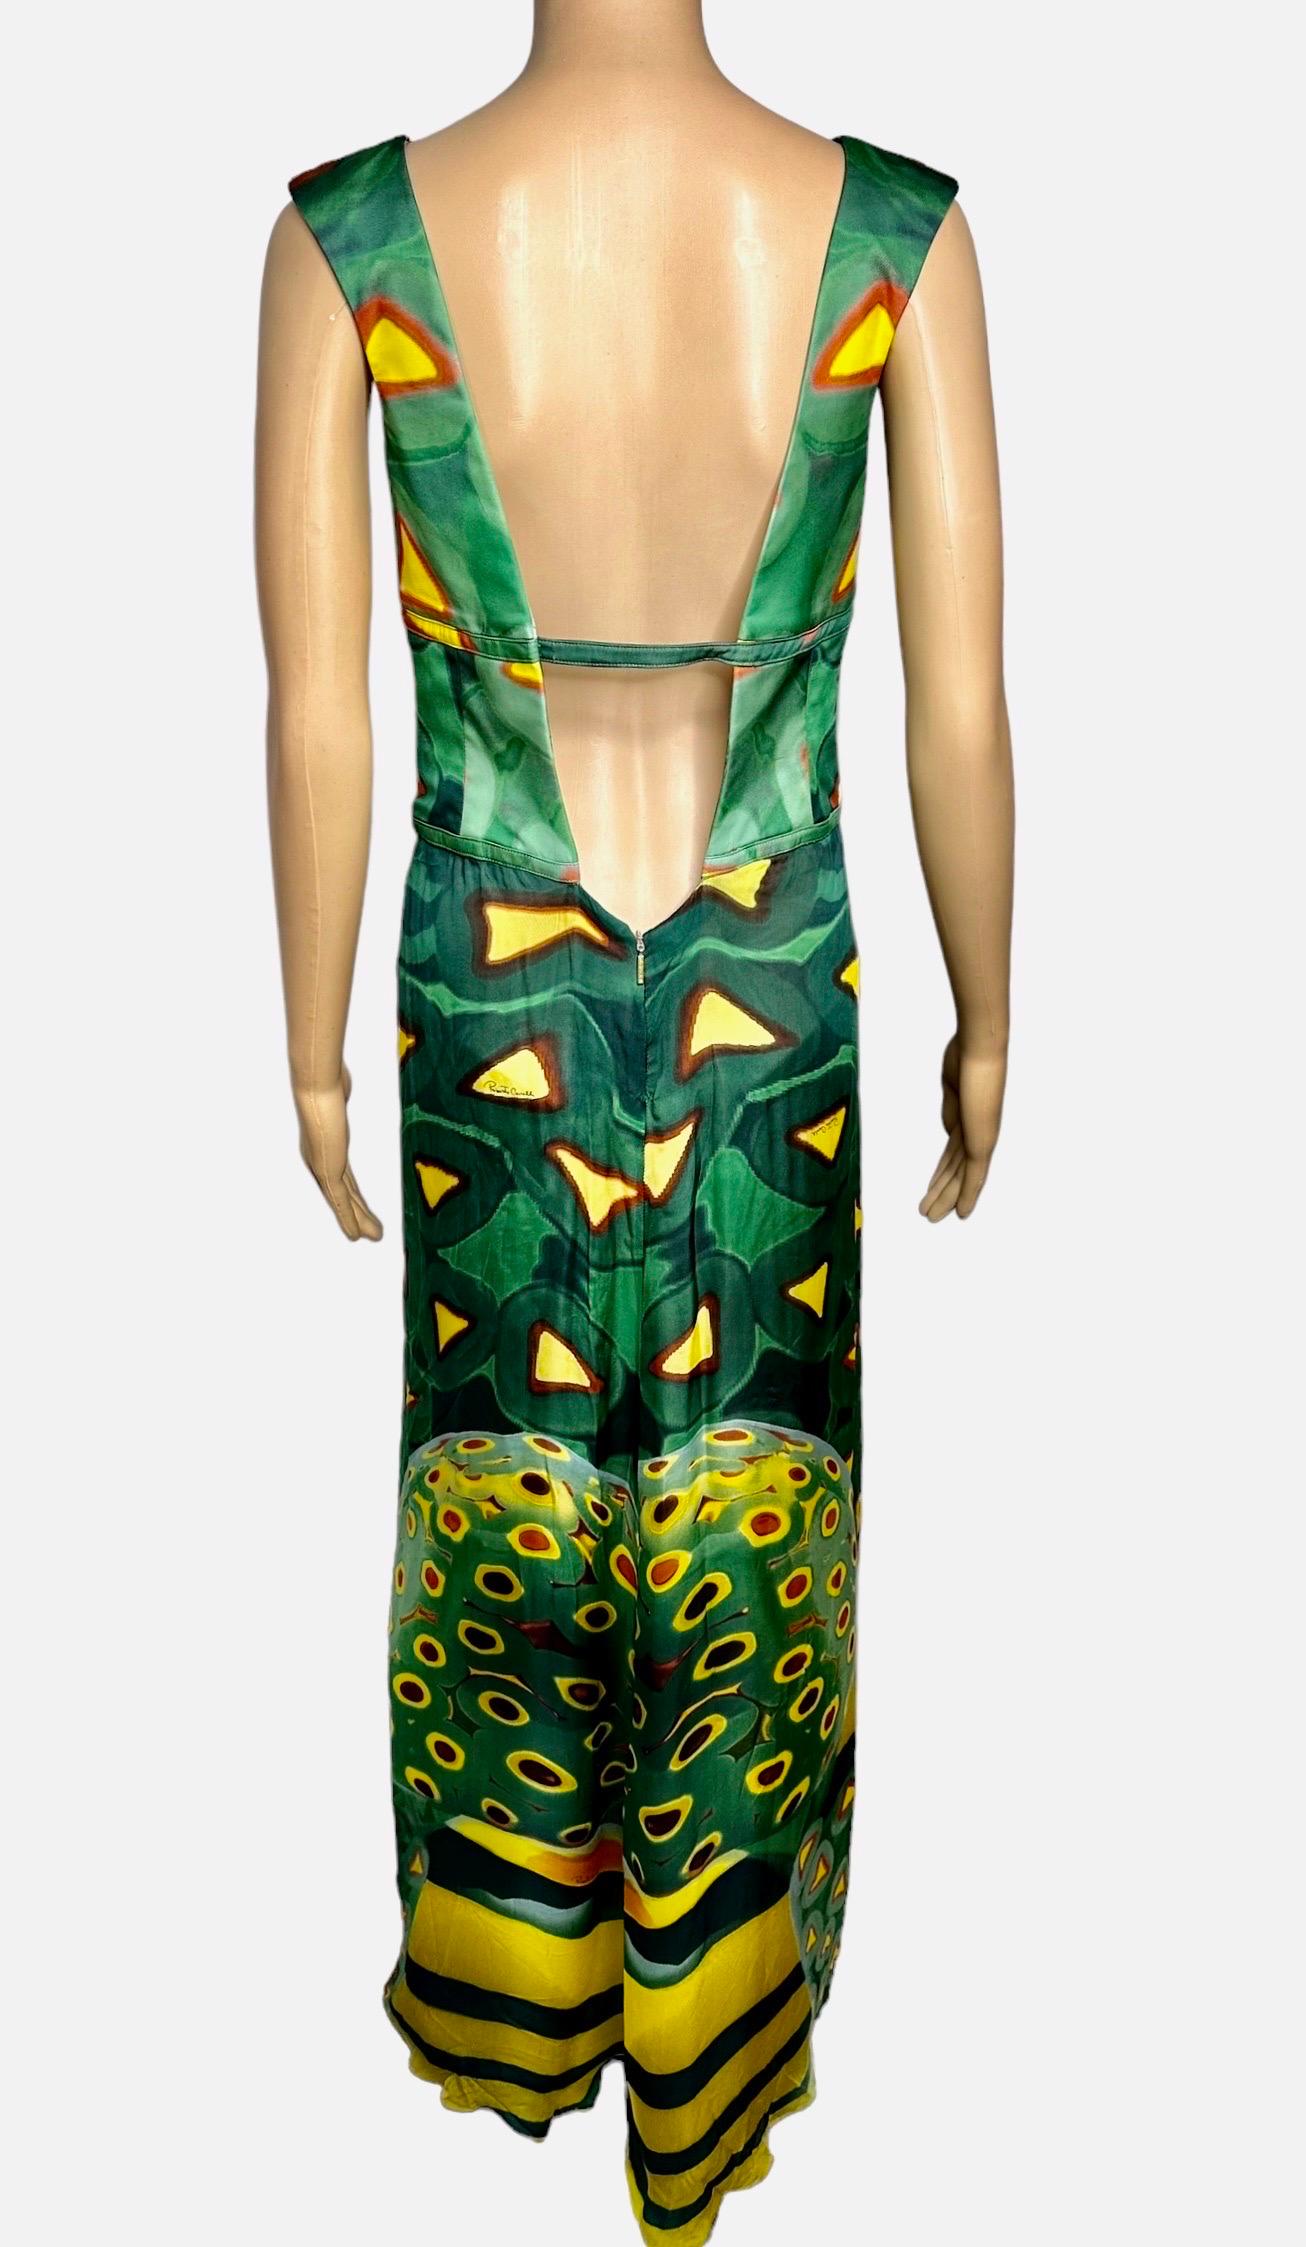 Roberto Cavalli S/S 2009 Plunging Neckline Open Back Evening Dress Gown For Sale 2